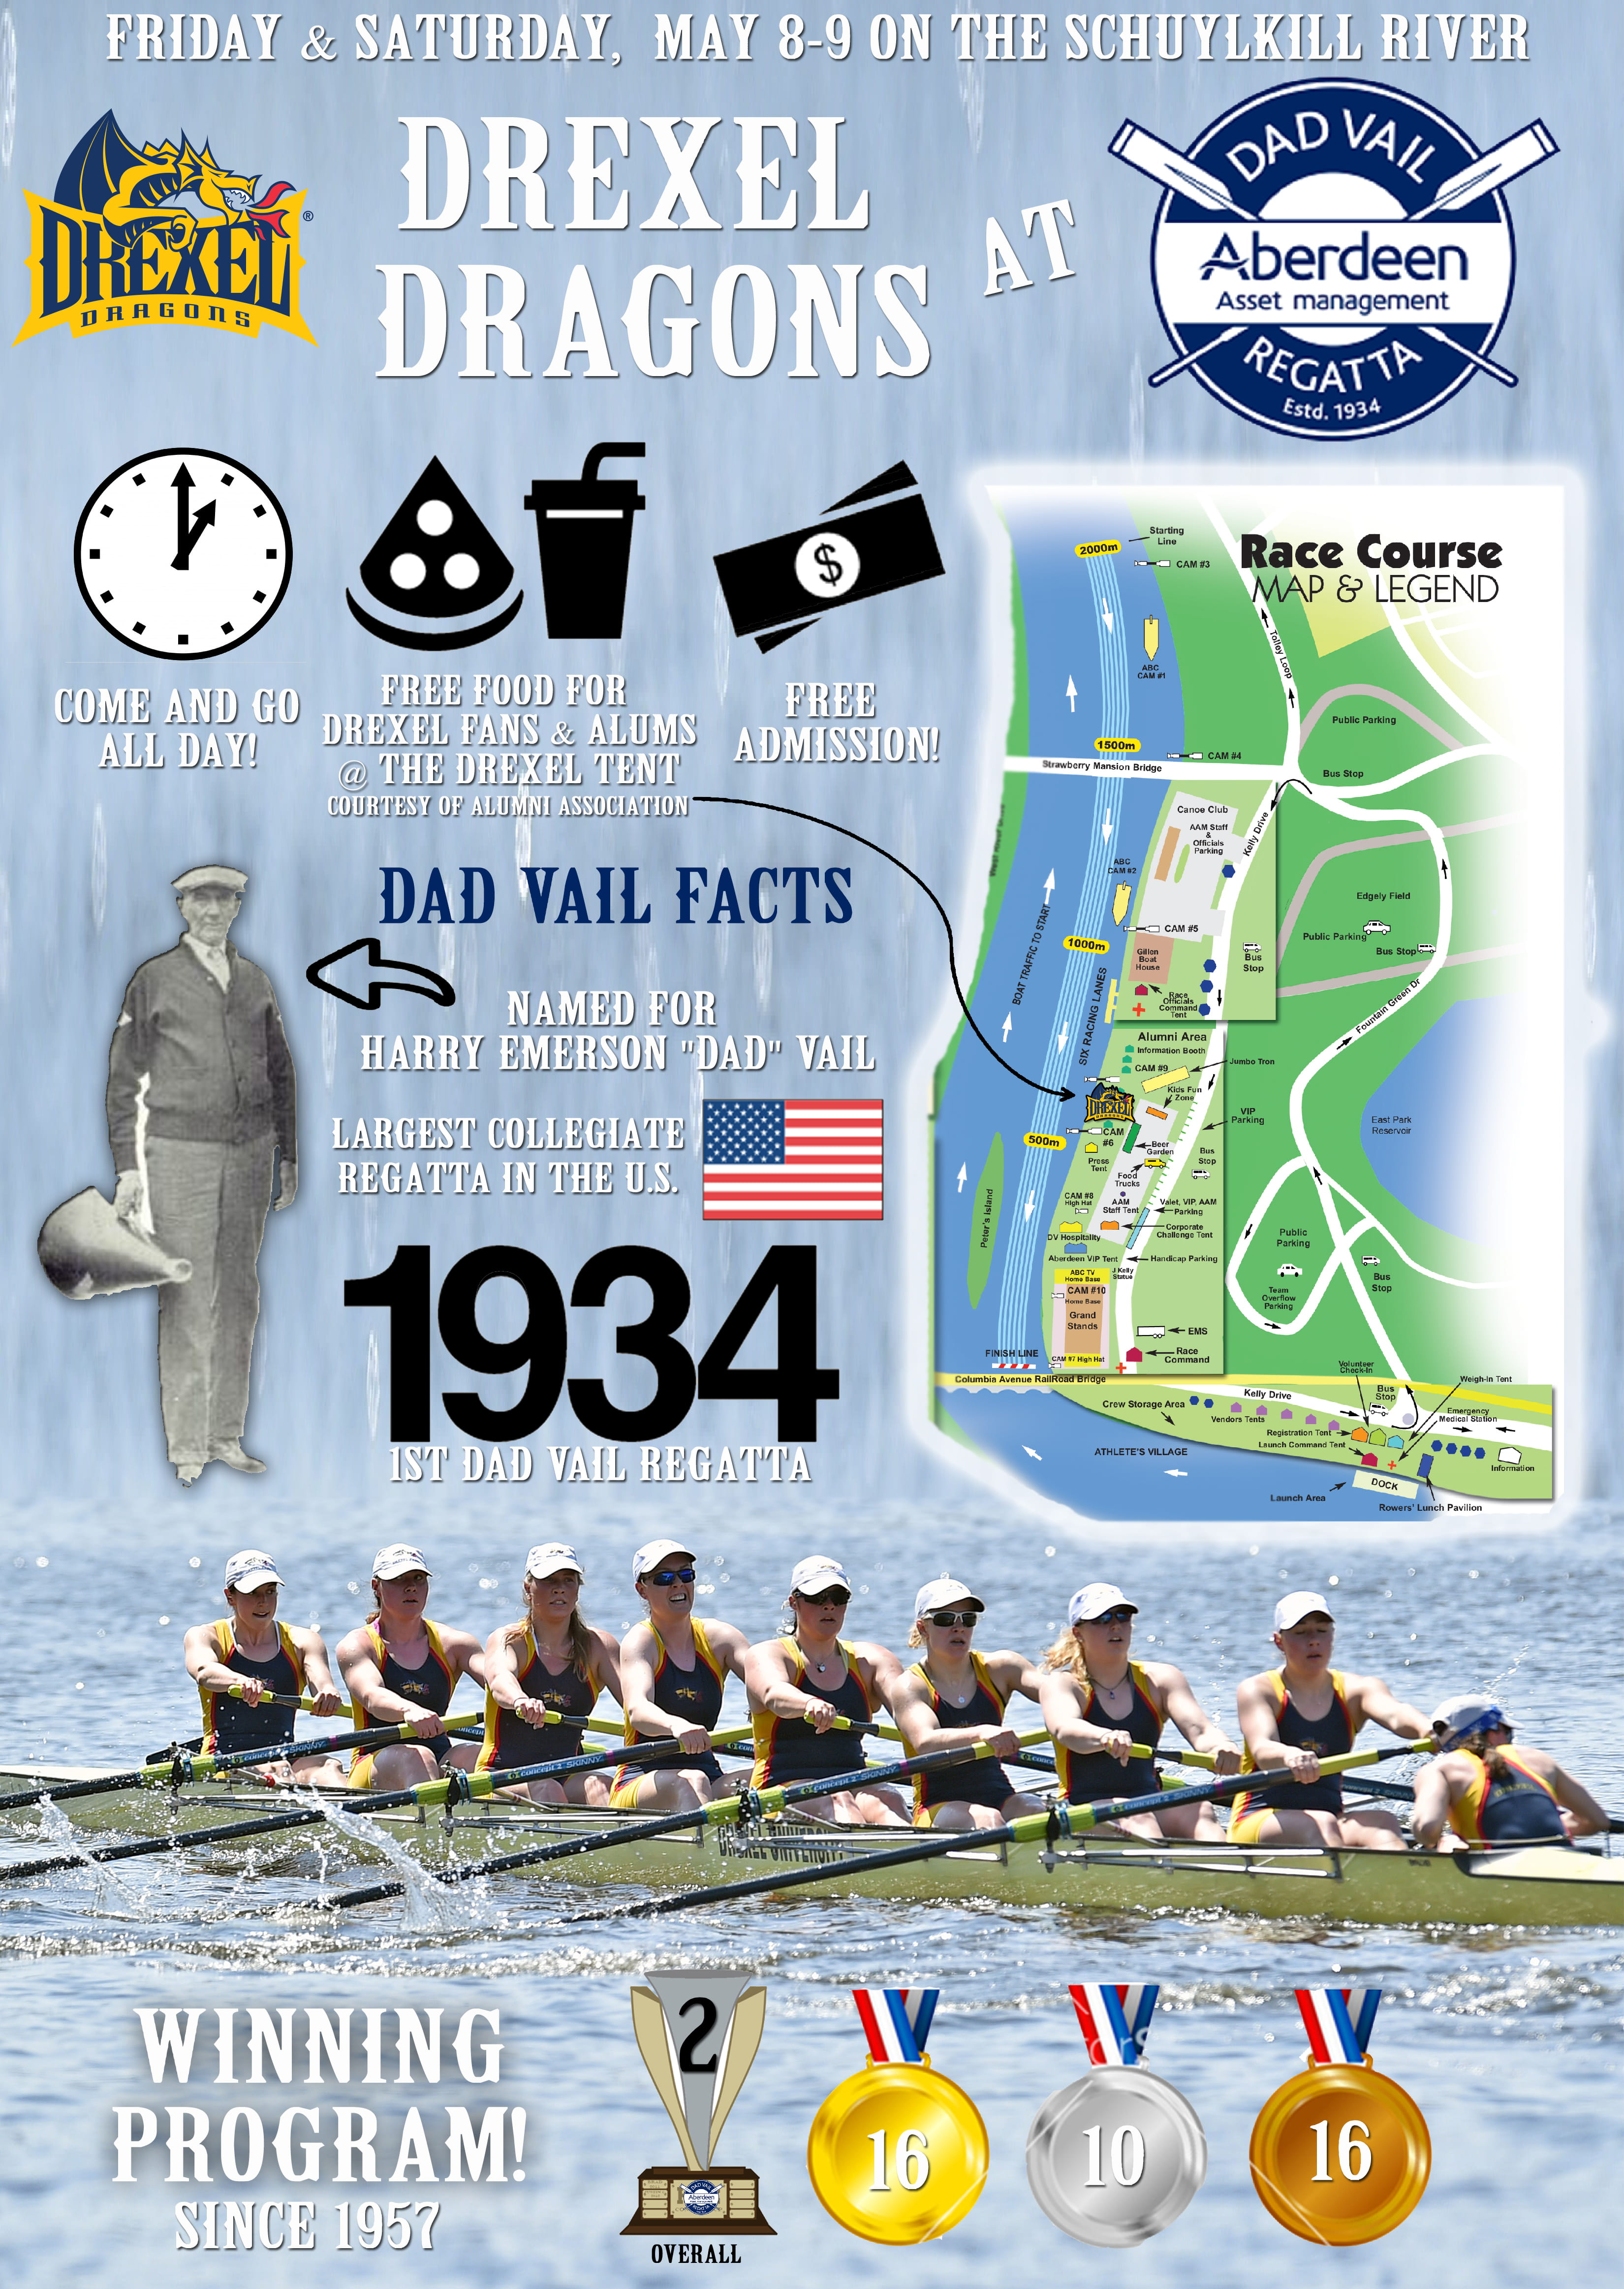 Some facts and figures on the Dad Vail Regatta from Drexel Athletics.